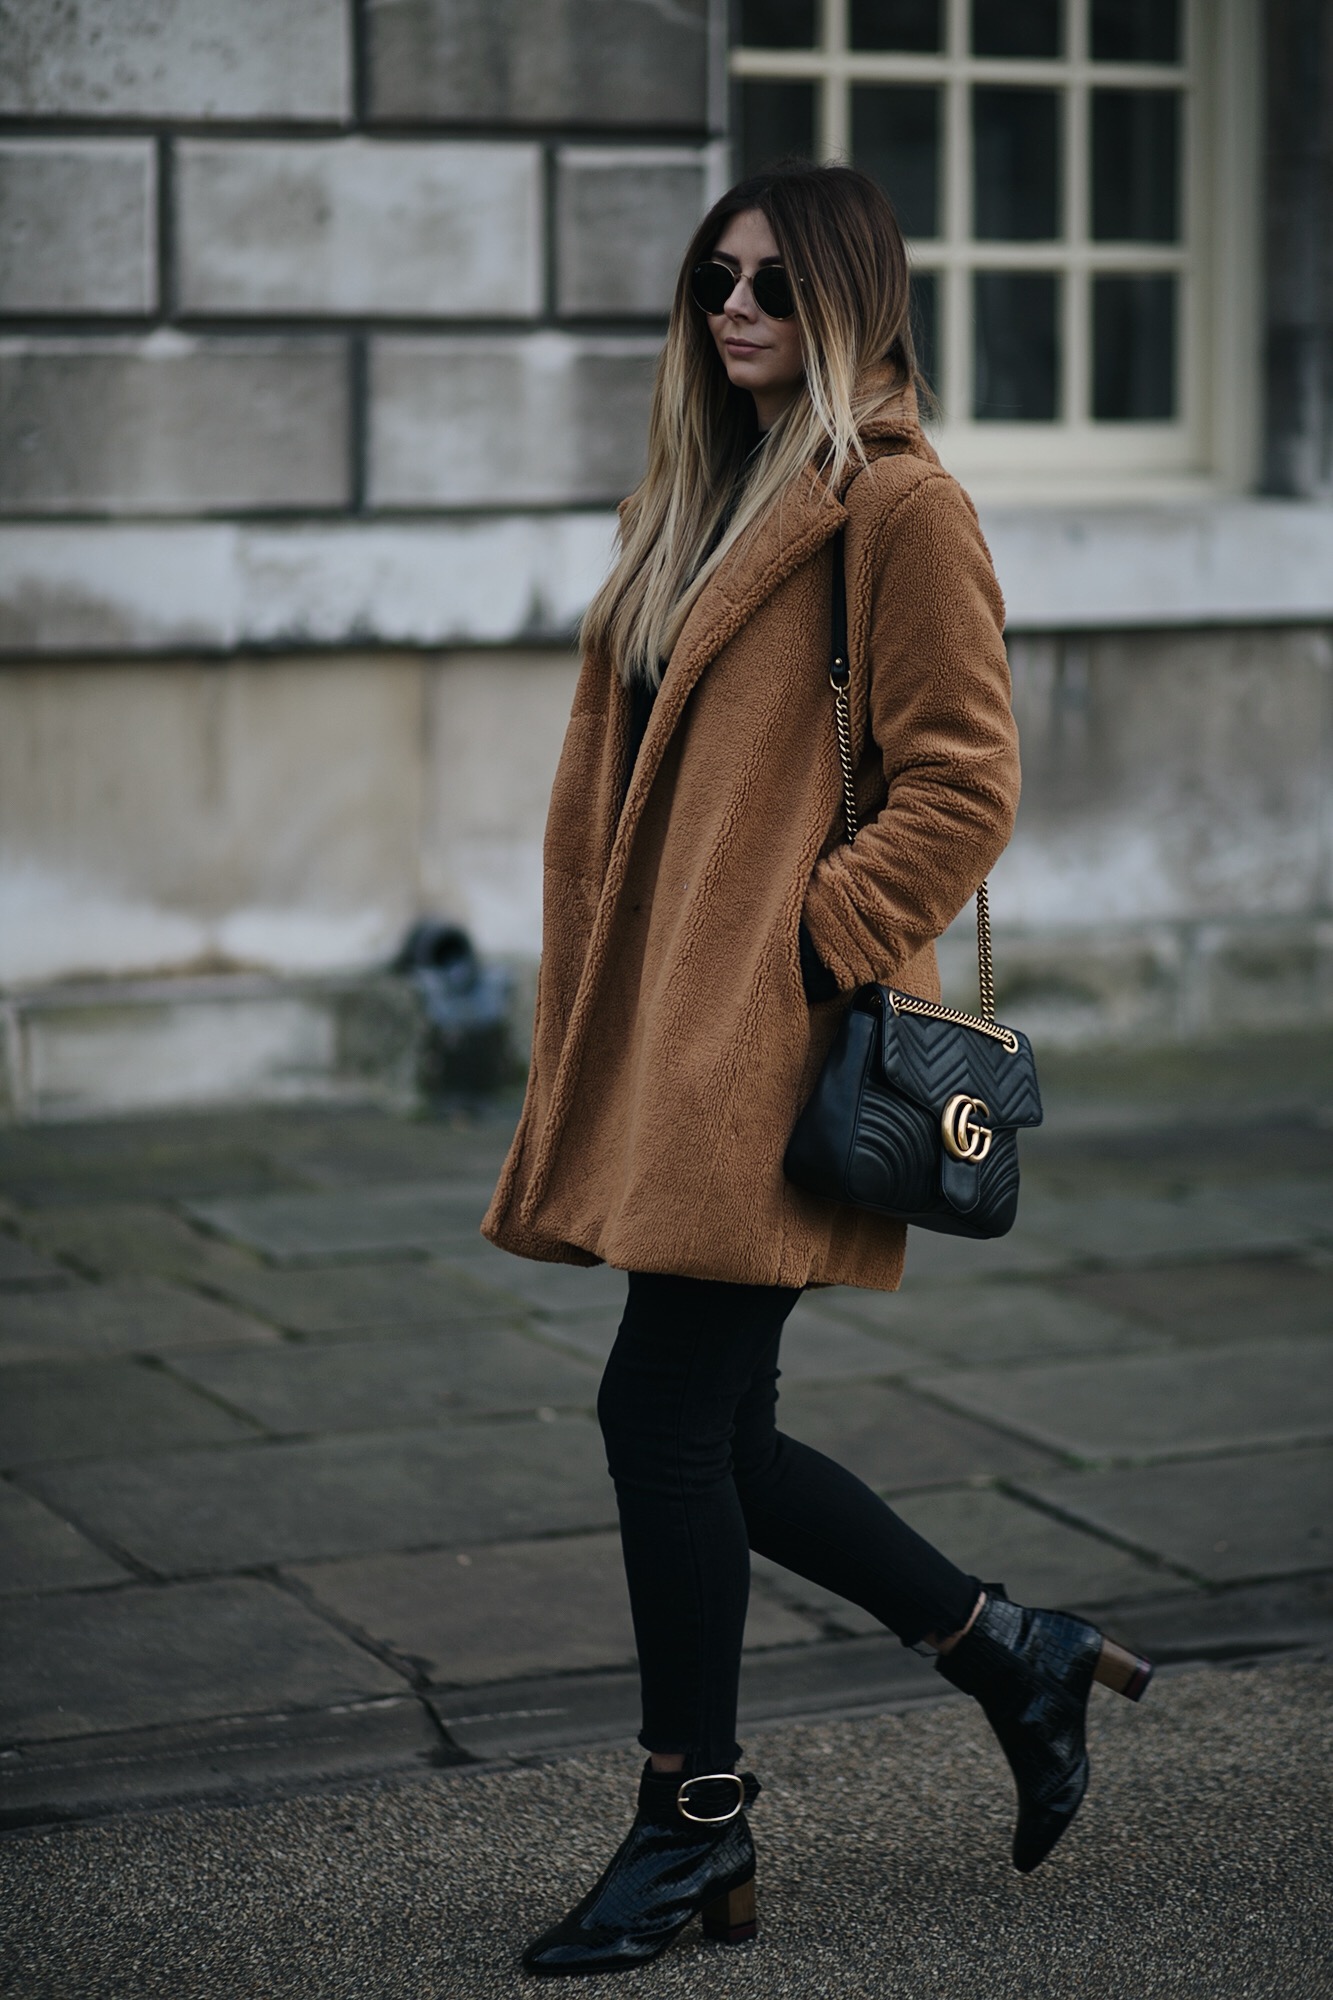 Emma Hill wears camel brown teddy bear coat, Gucci medium black leather Marmont bag, black skinny frayed hem jeans, black patent ankle boots, winter outfit